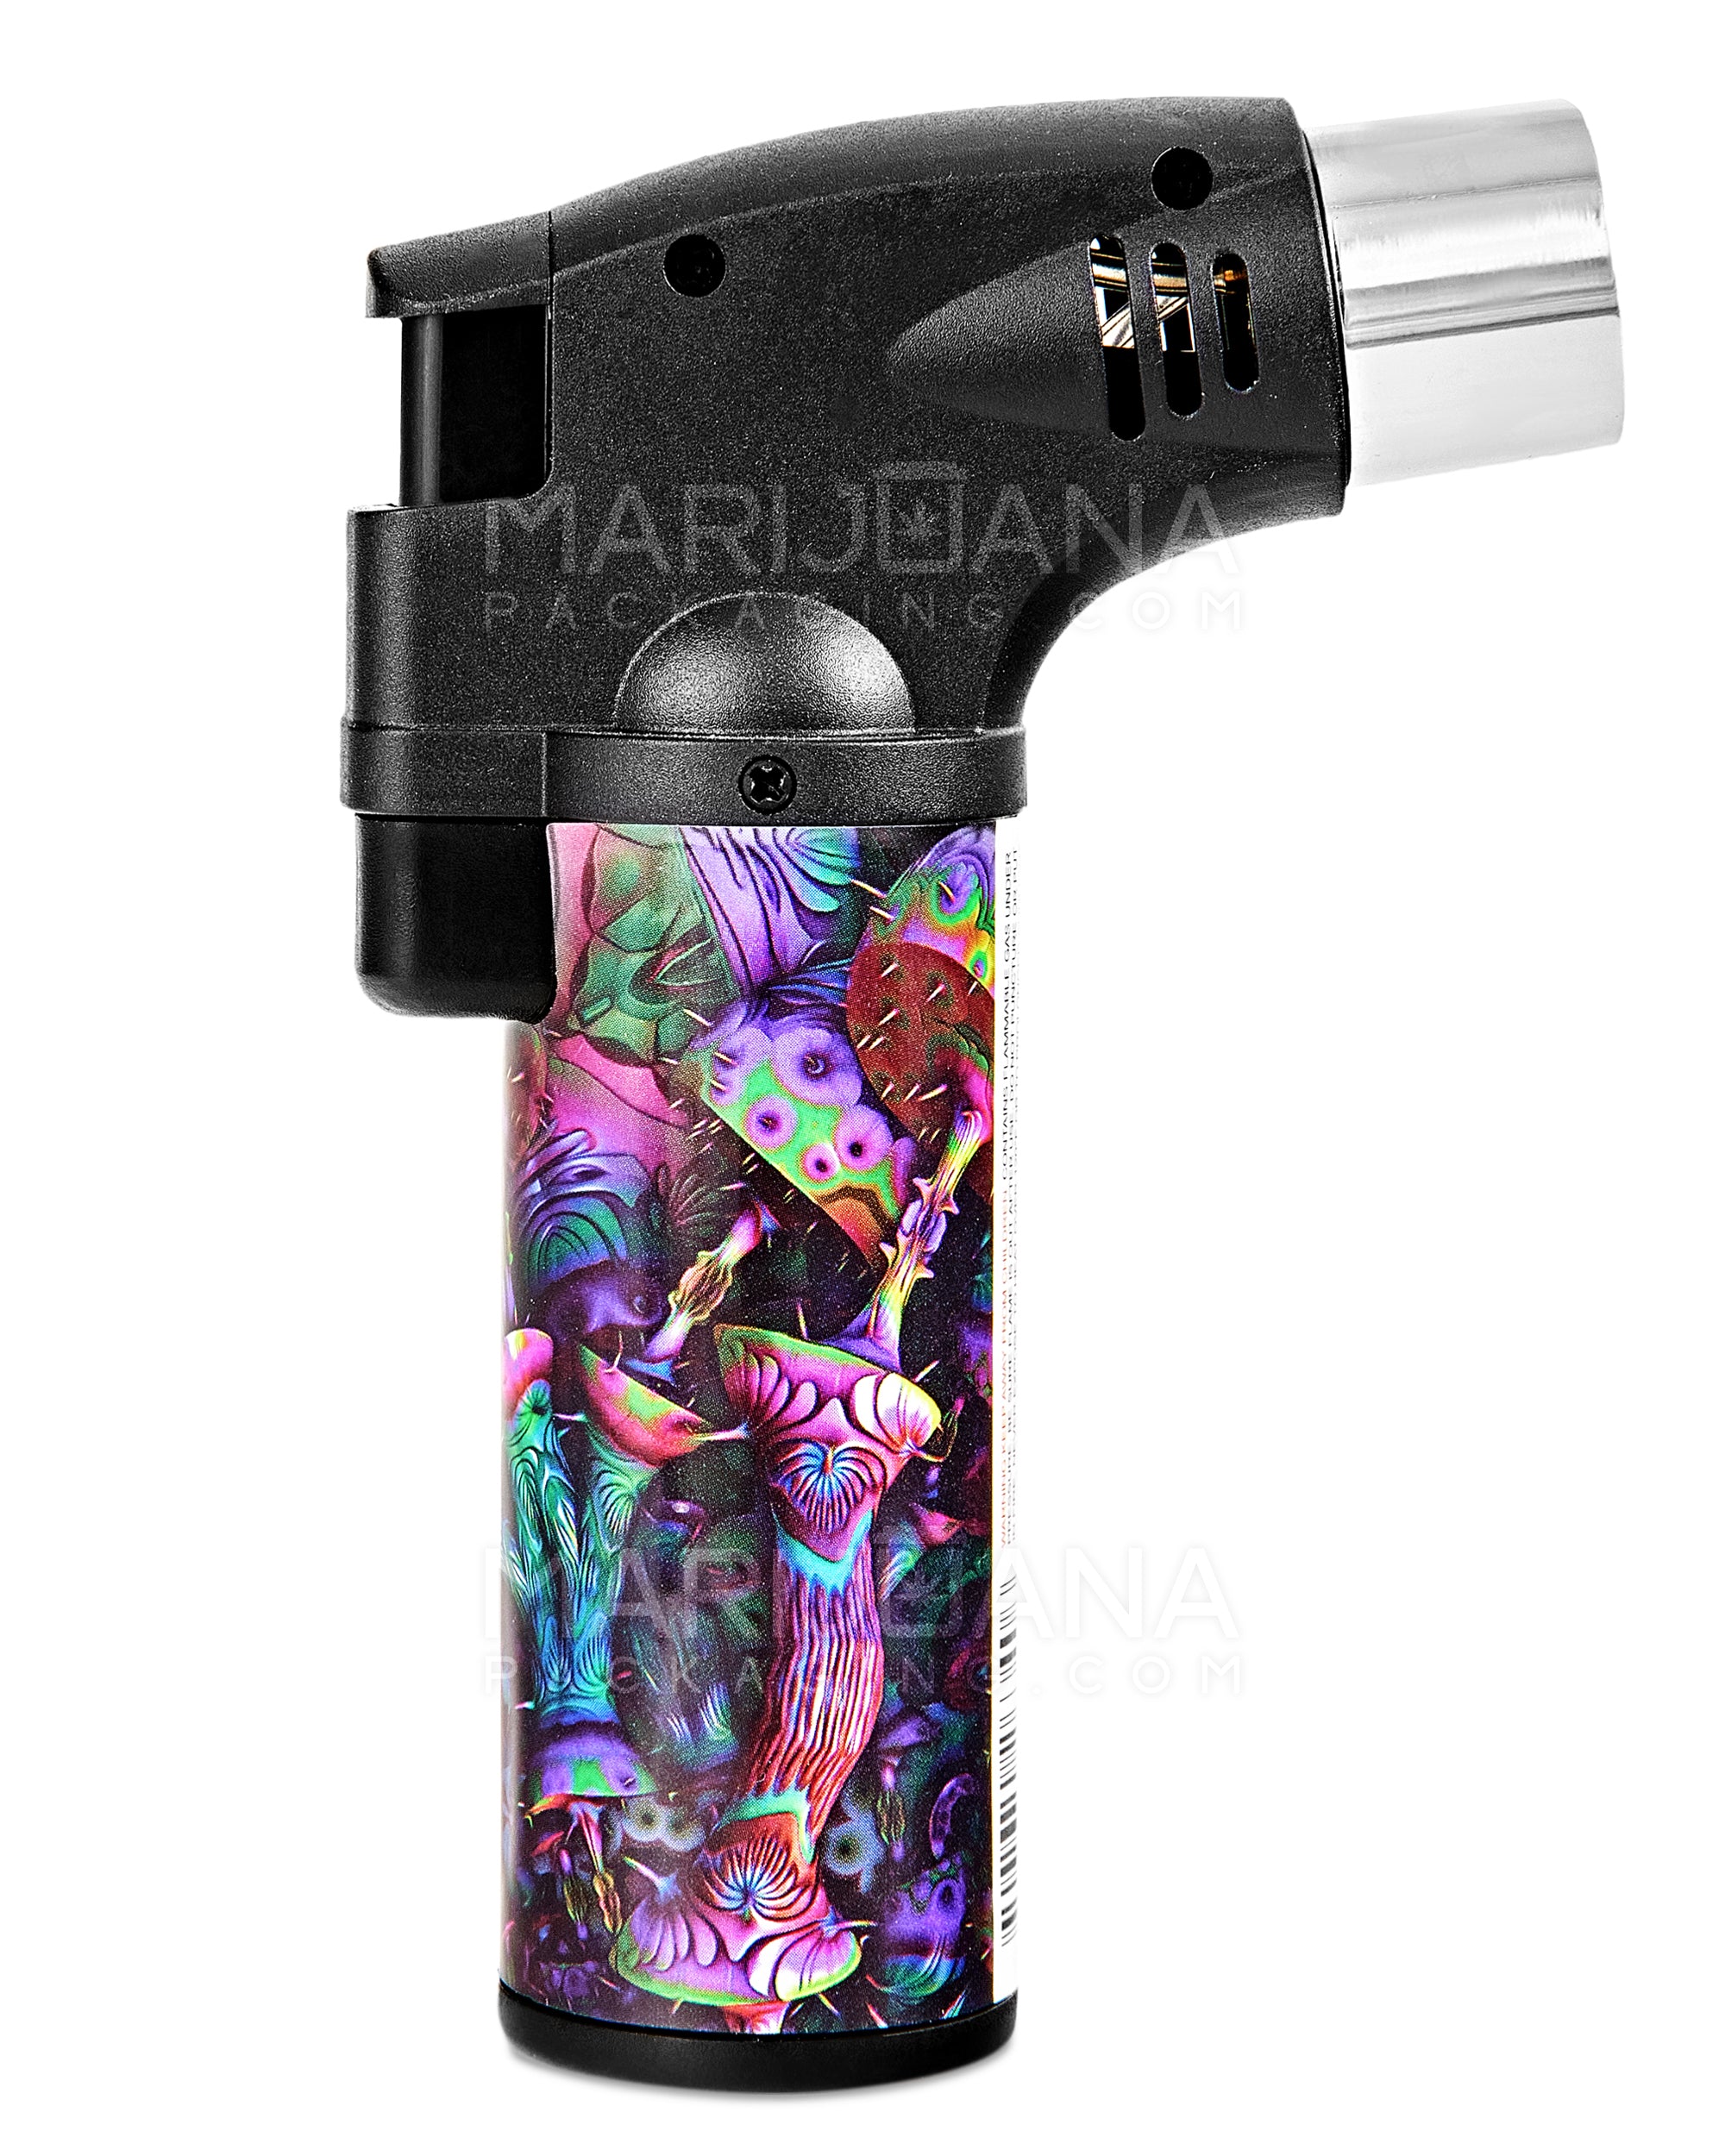 Psychedelic Design Plastic Torch w/ Safety Lock | 4.5in Tall - Butane - Assorted - 4